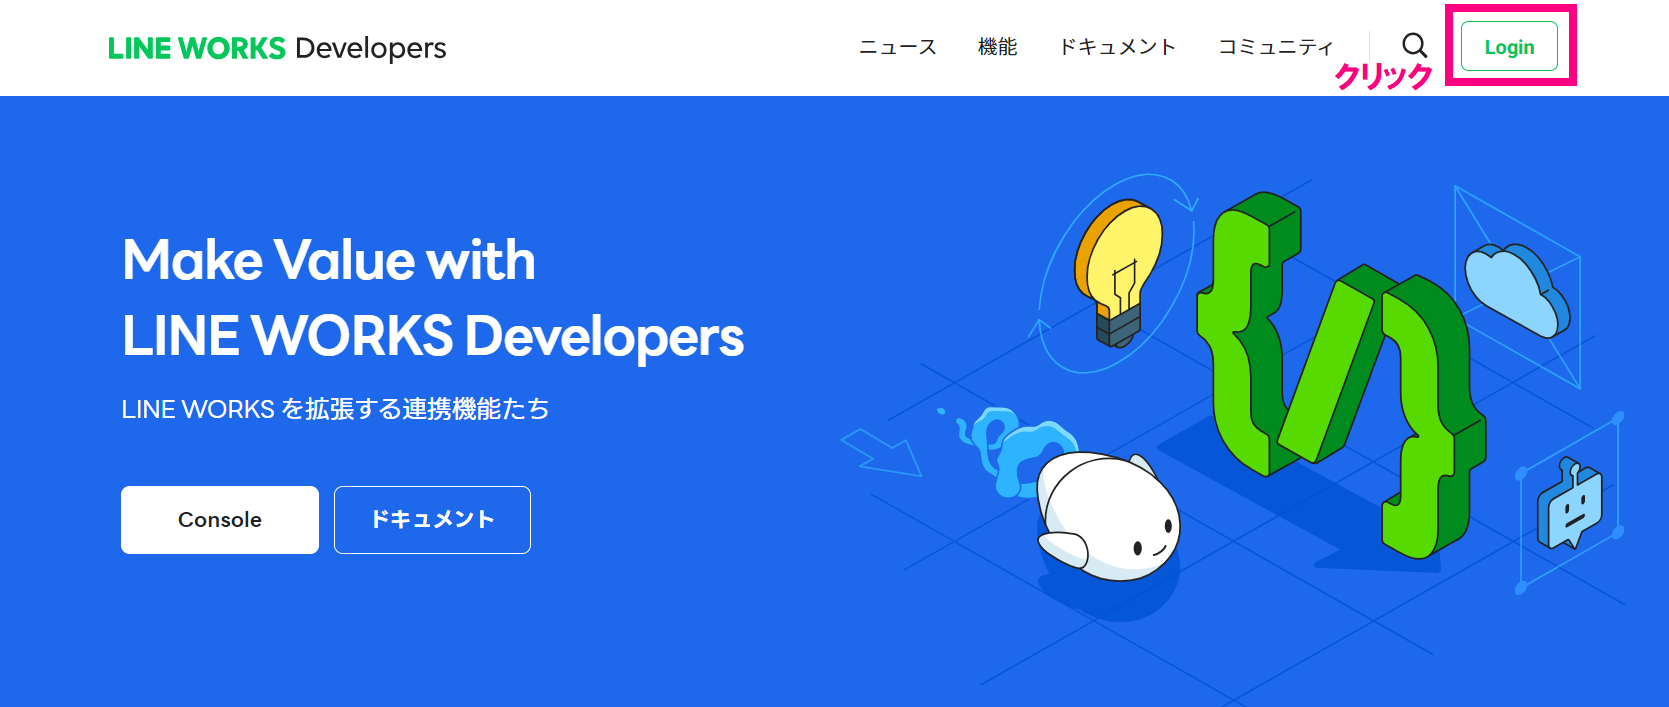 step7_LINE WORKS Developersログイン.png